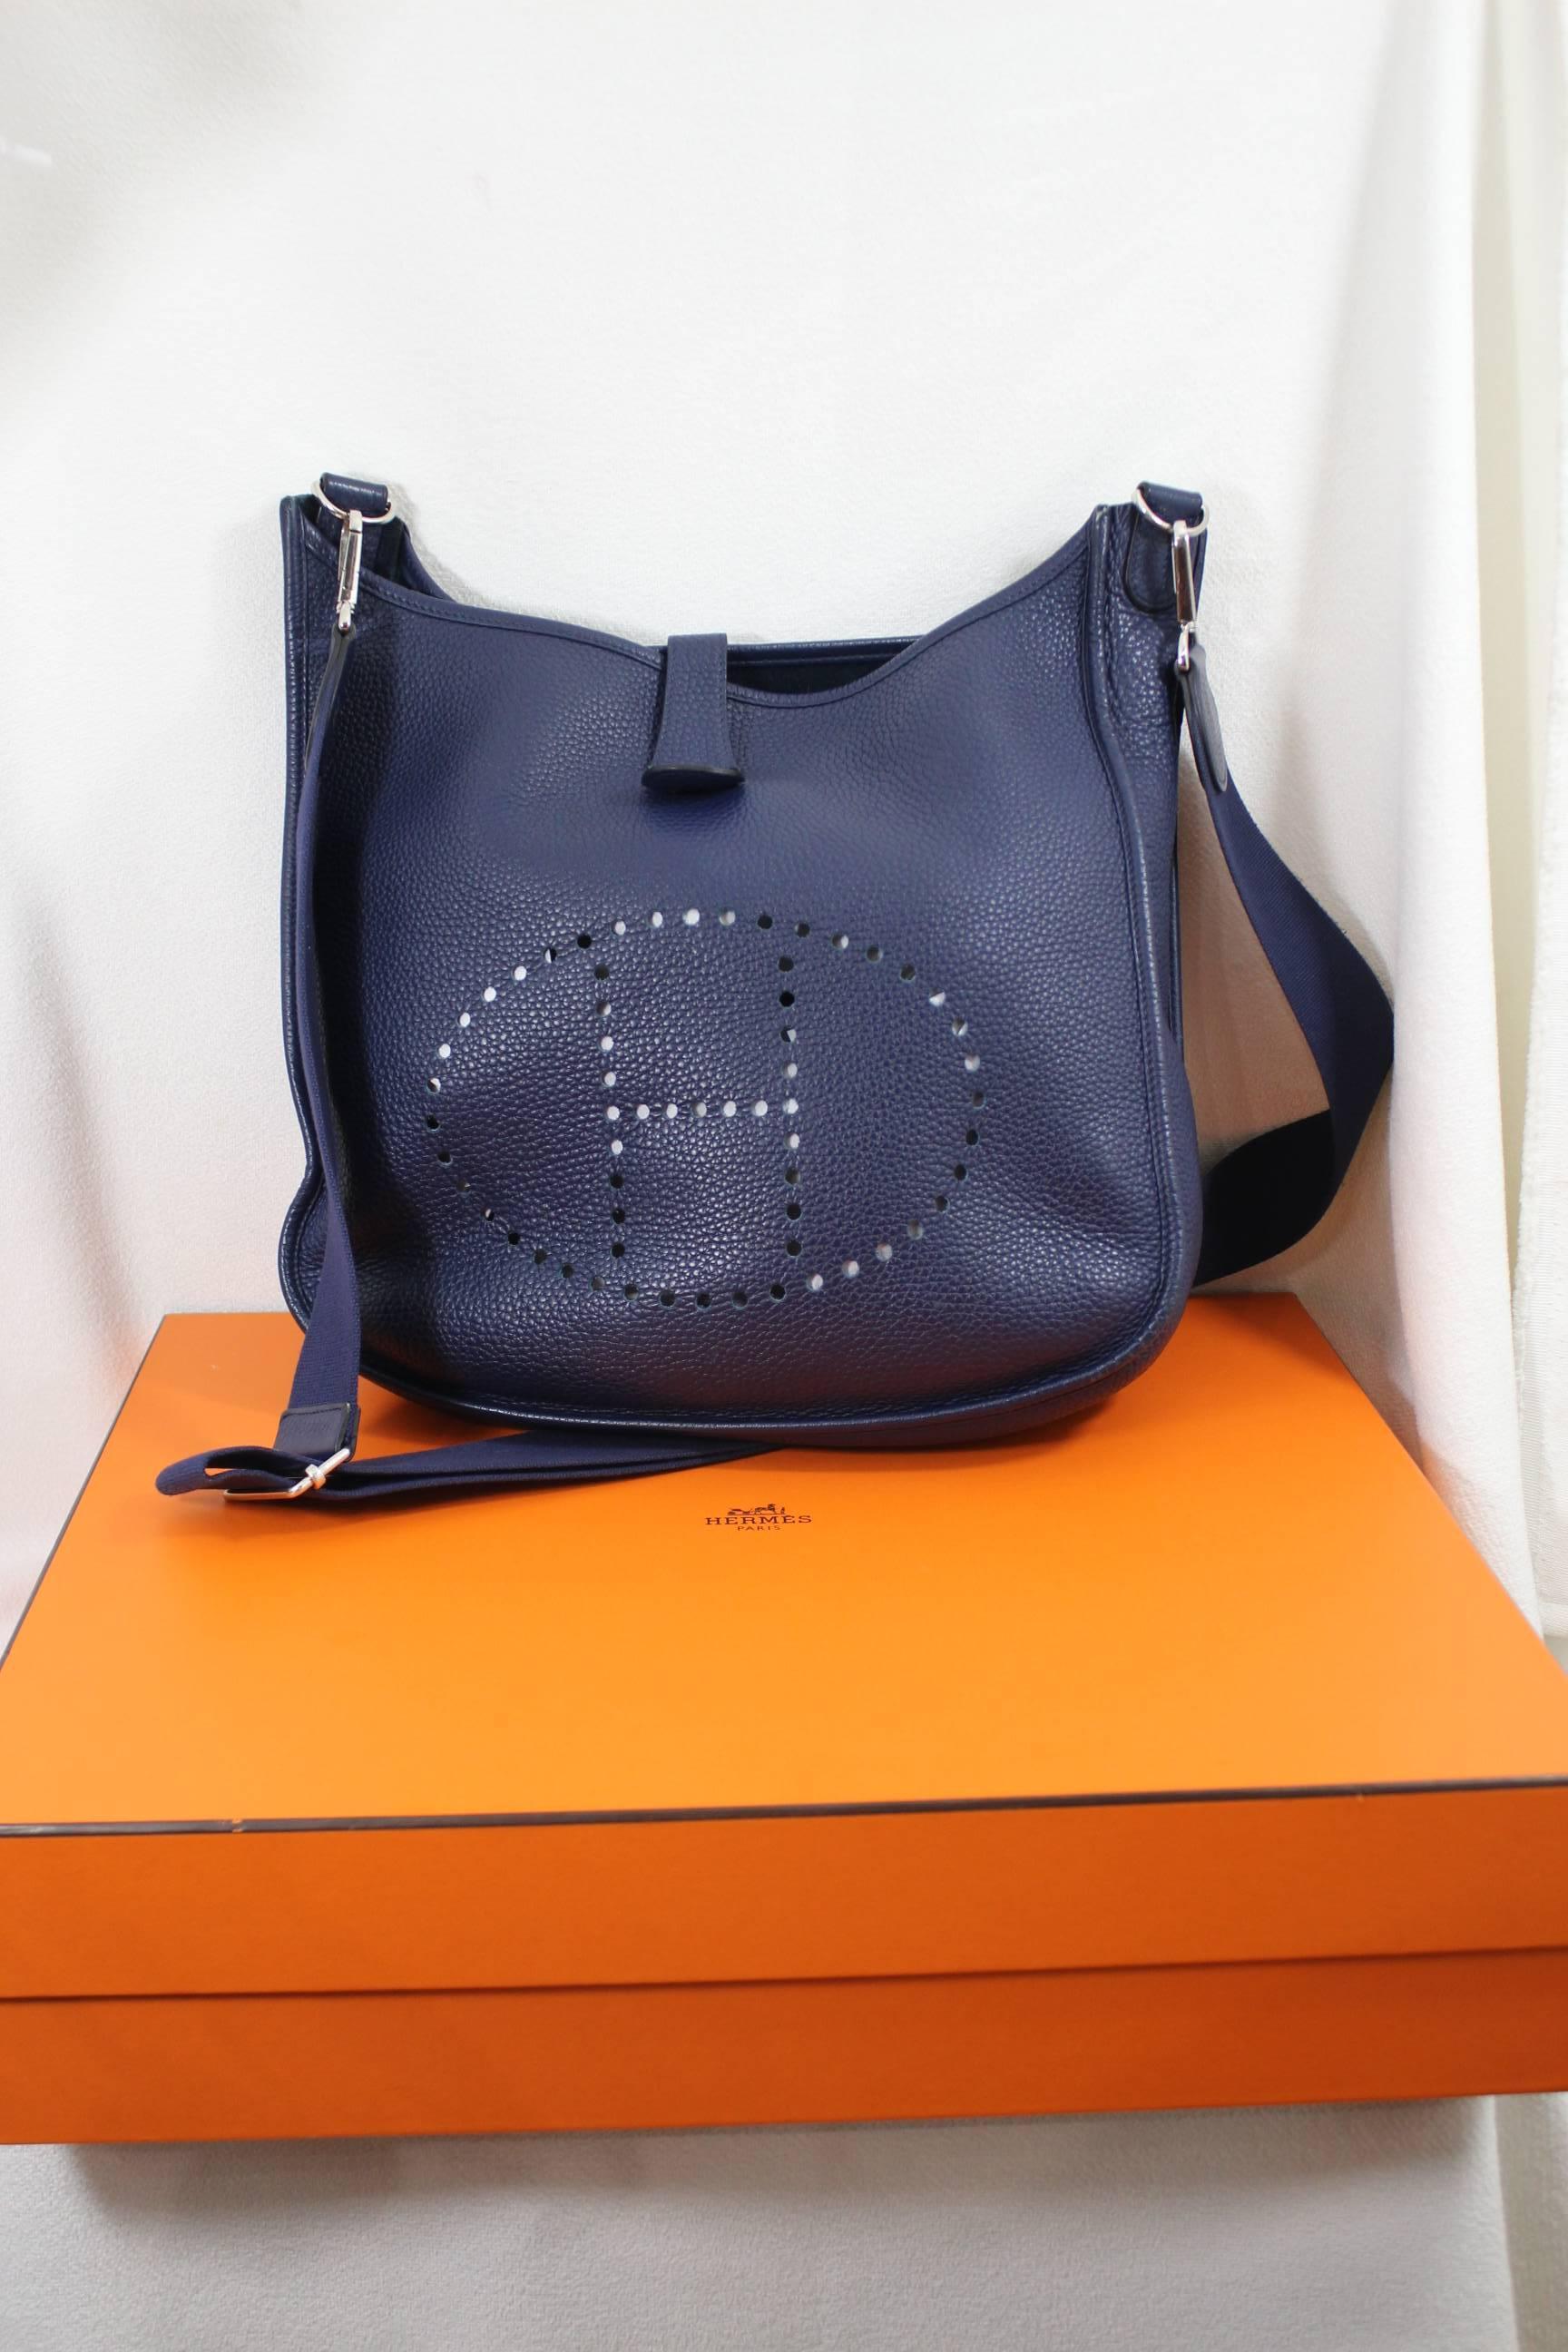 Women's or Men's 2013 Hermes Evelyne Blue Gained Leather Bag. Good condition